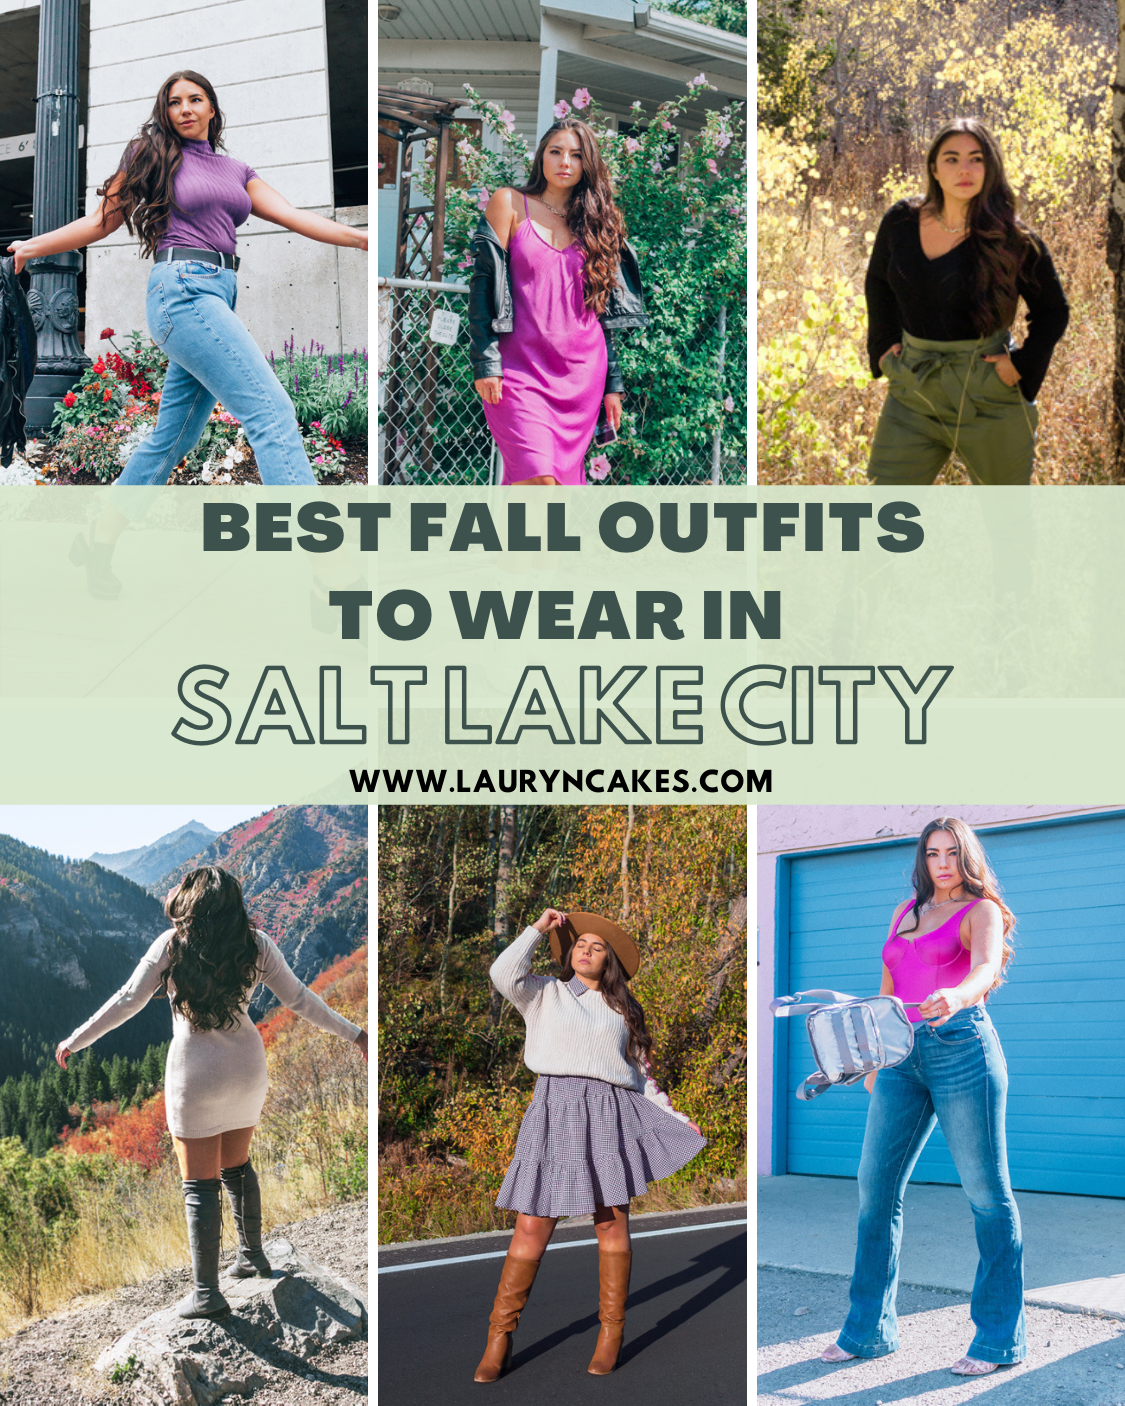 Outfits to Wear in Salt Lake City and the best autumn style for Northern Utah